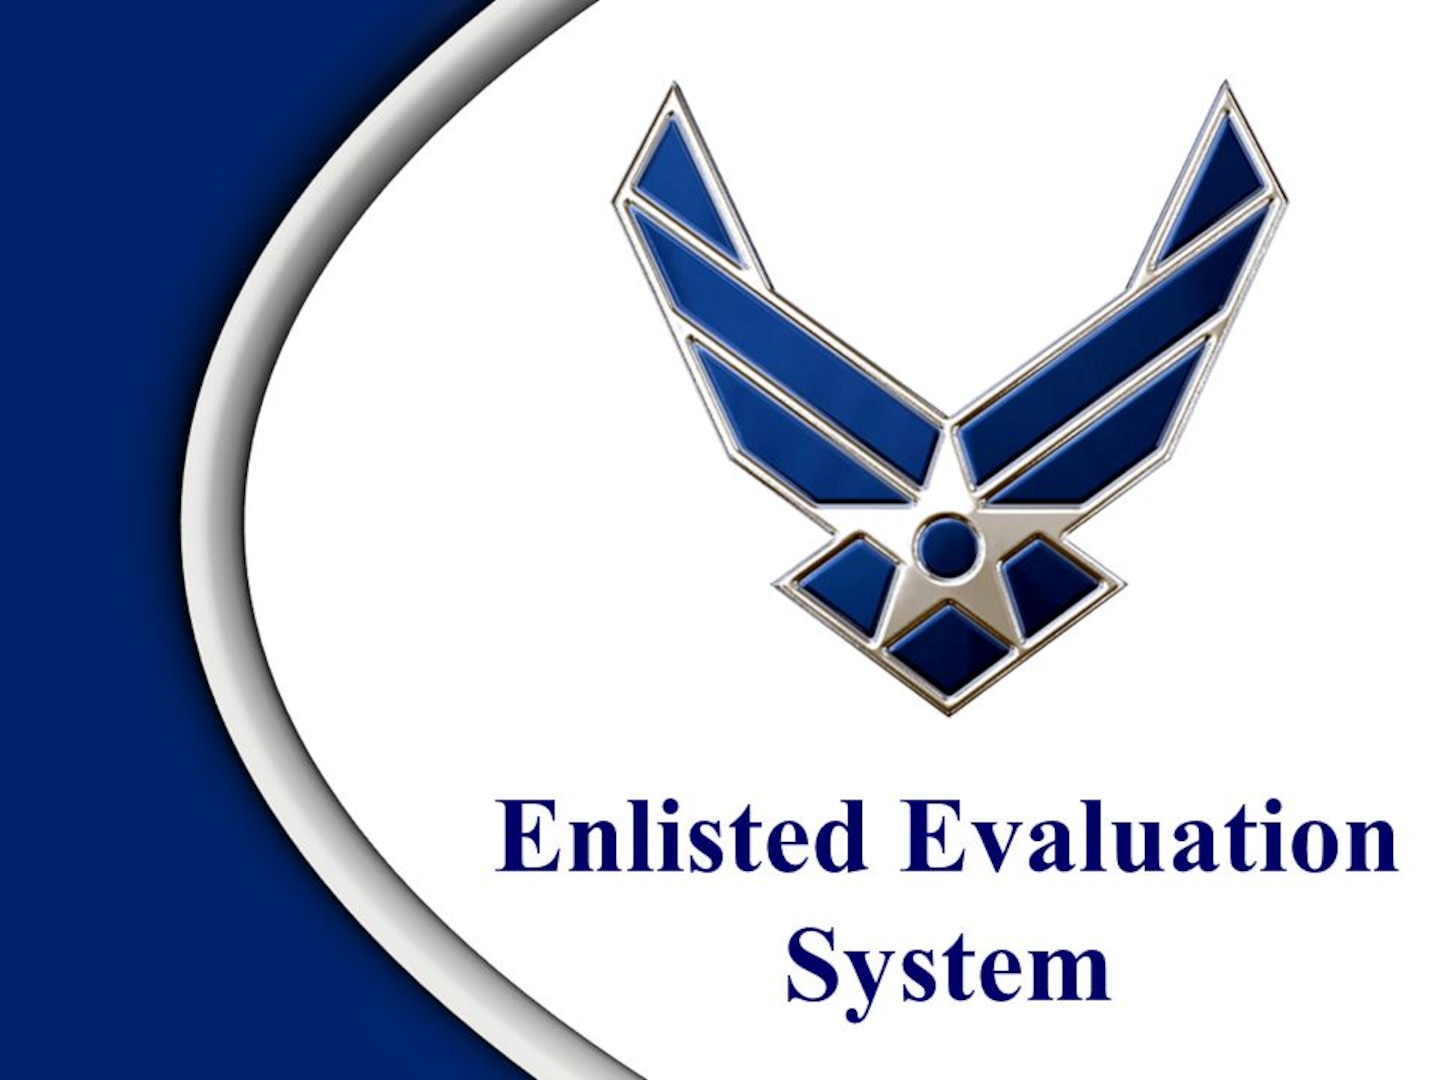 The Air Force recently updated evaluation policies for enlisted Airmen, refining the process and requirements for enlisted performance reports.